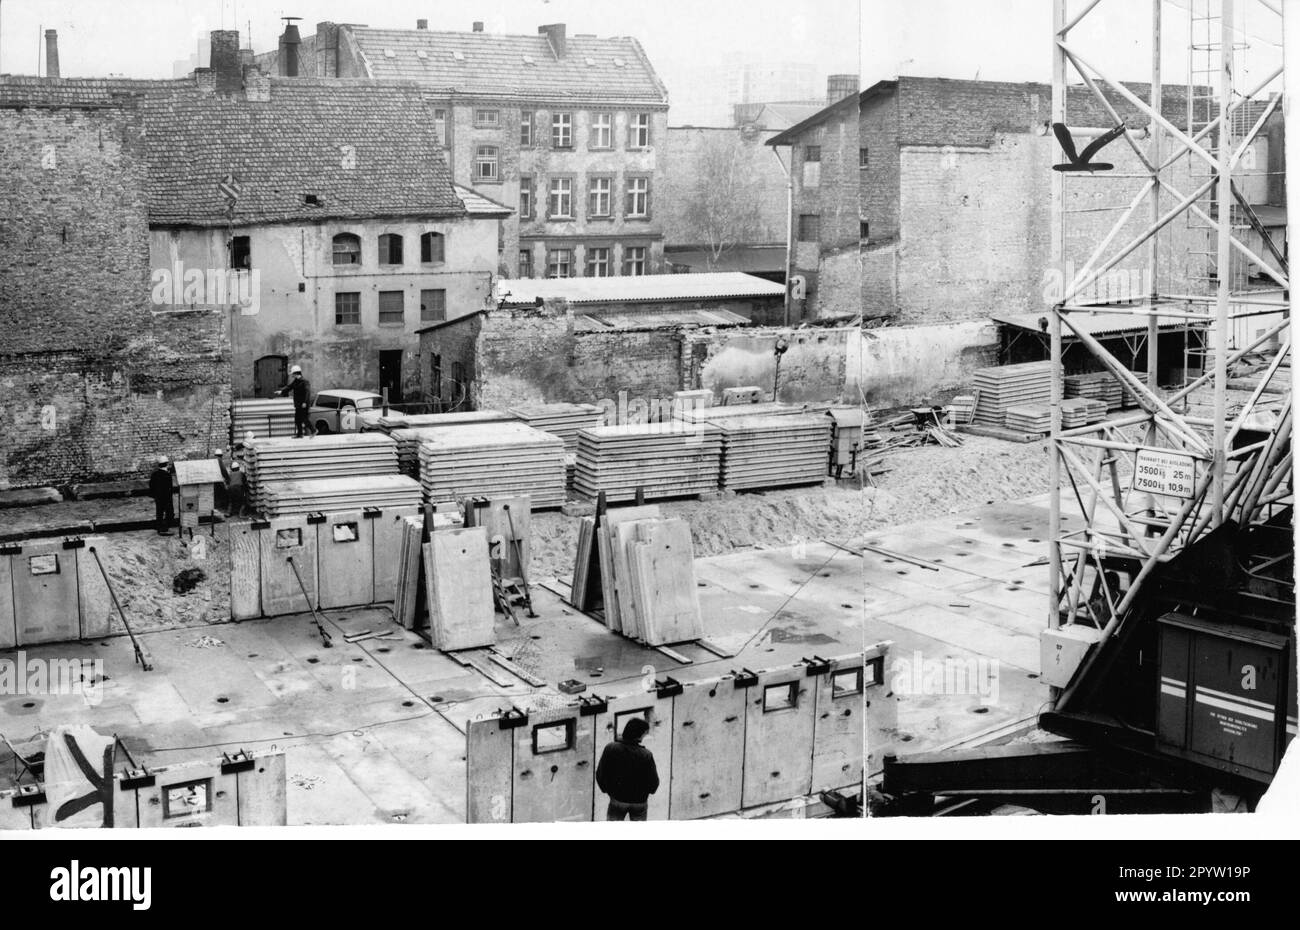 Construction work/building site in Gutenbergstraße. After demolition of old houses, modern new buildings are being erected in the traditional architectural style. Housing construction. GDR. Photo: MAZ/Annelies Jentsch, March 1983 [automated translation] Stock Photo